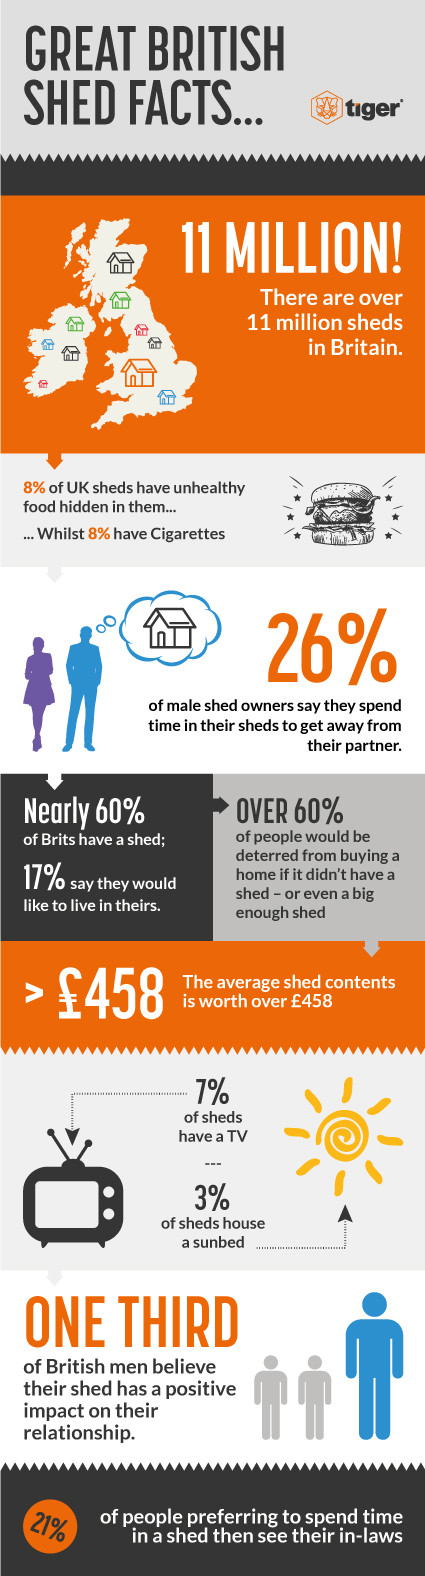 Infographic of "Great British Shed Facts"